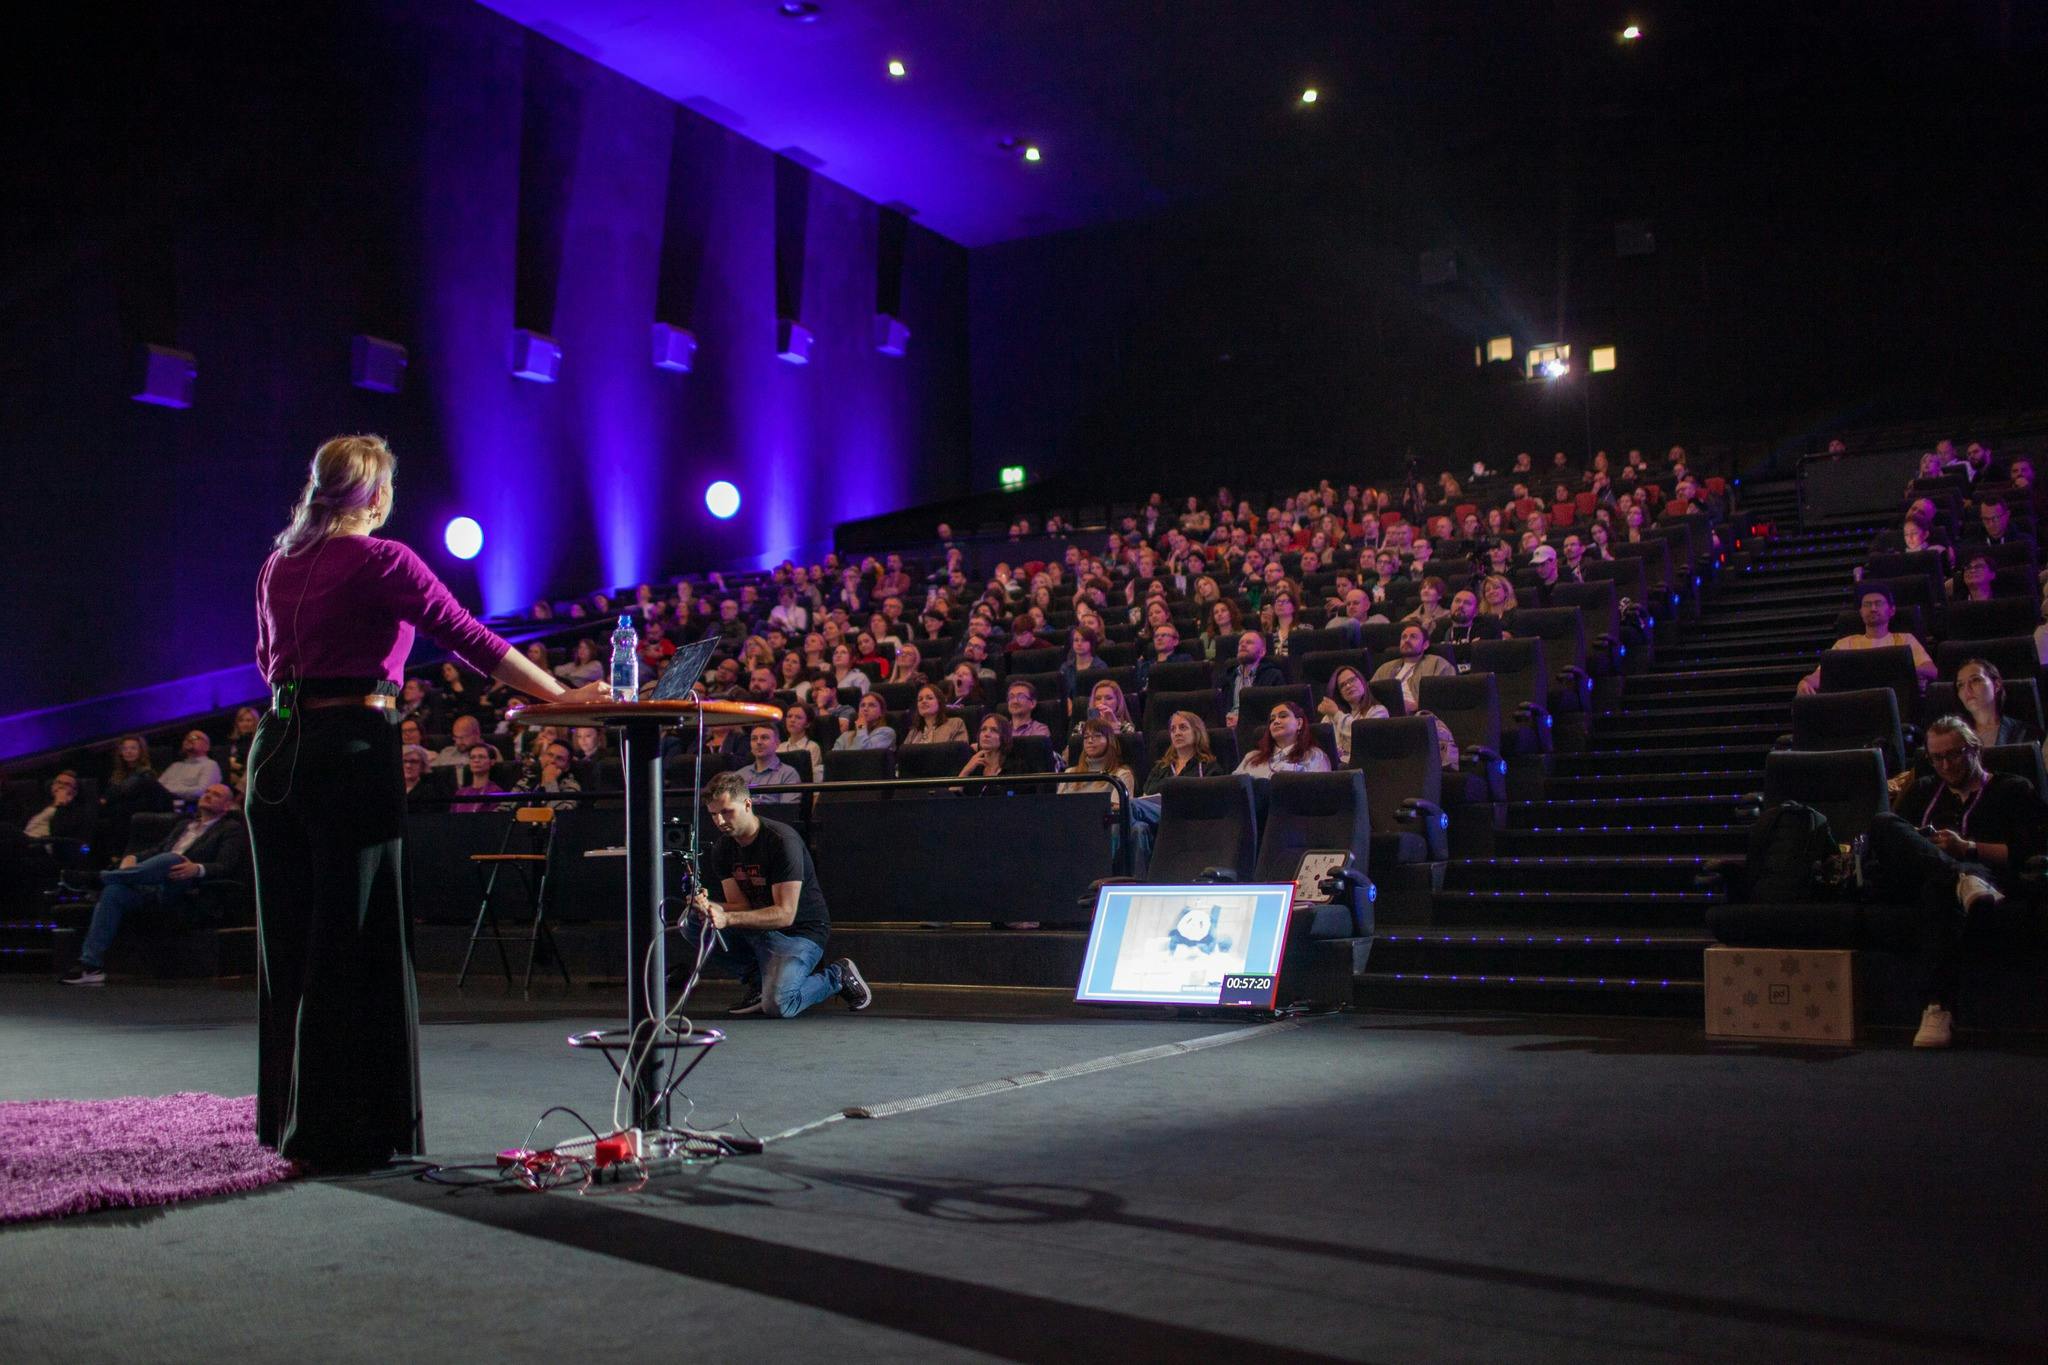 Typical scene of a conference where a person is presenting in front of an audience